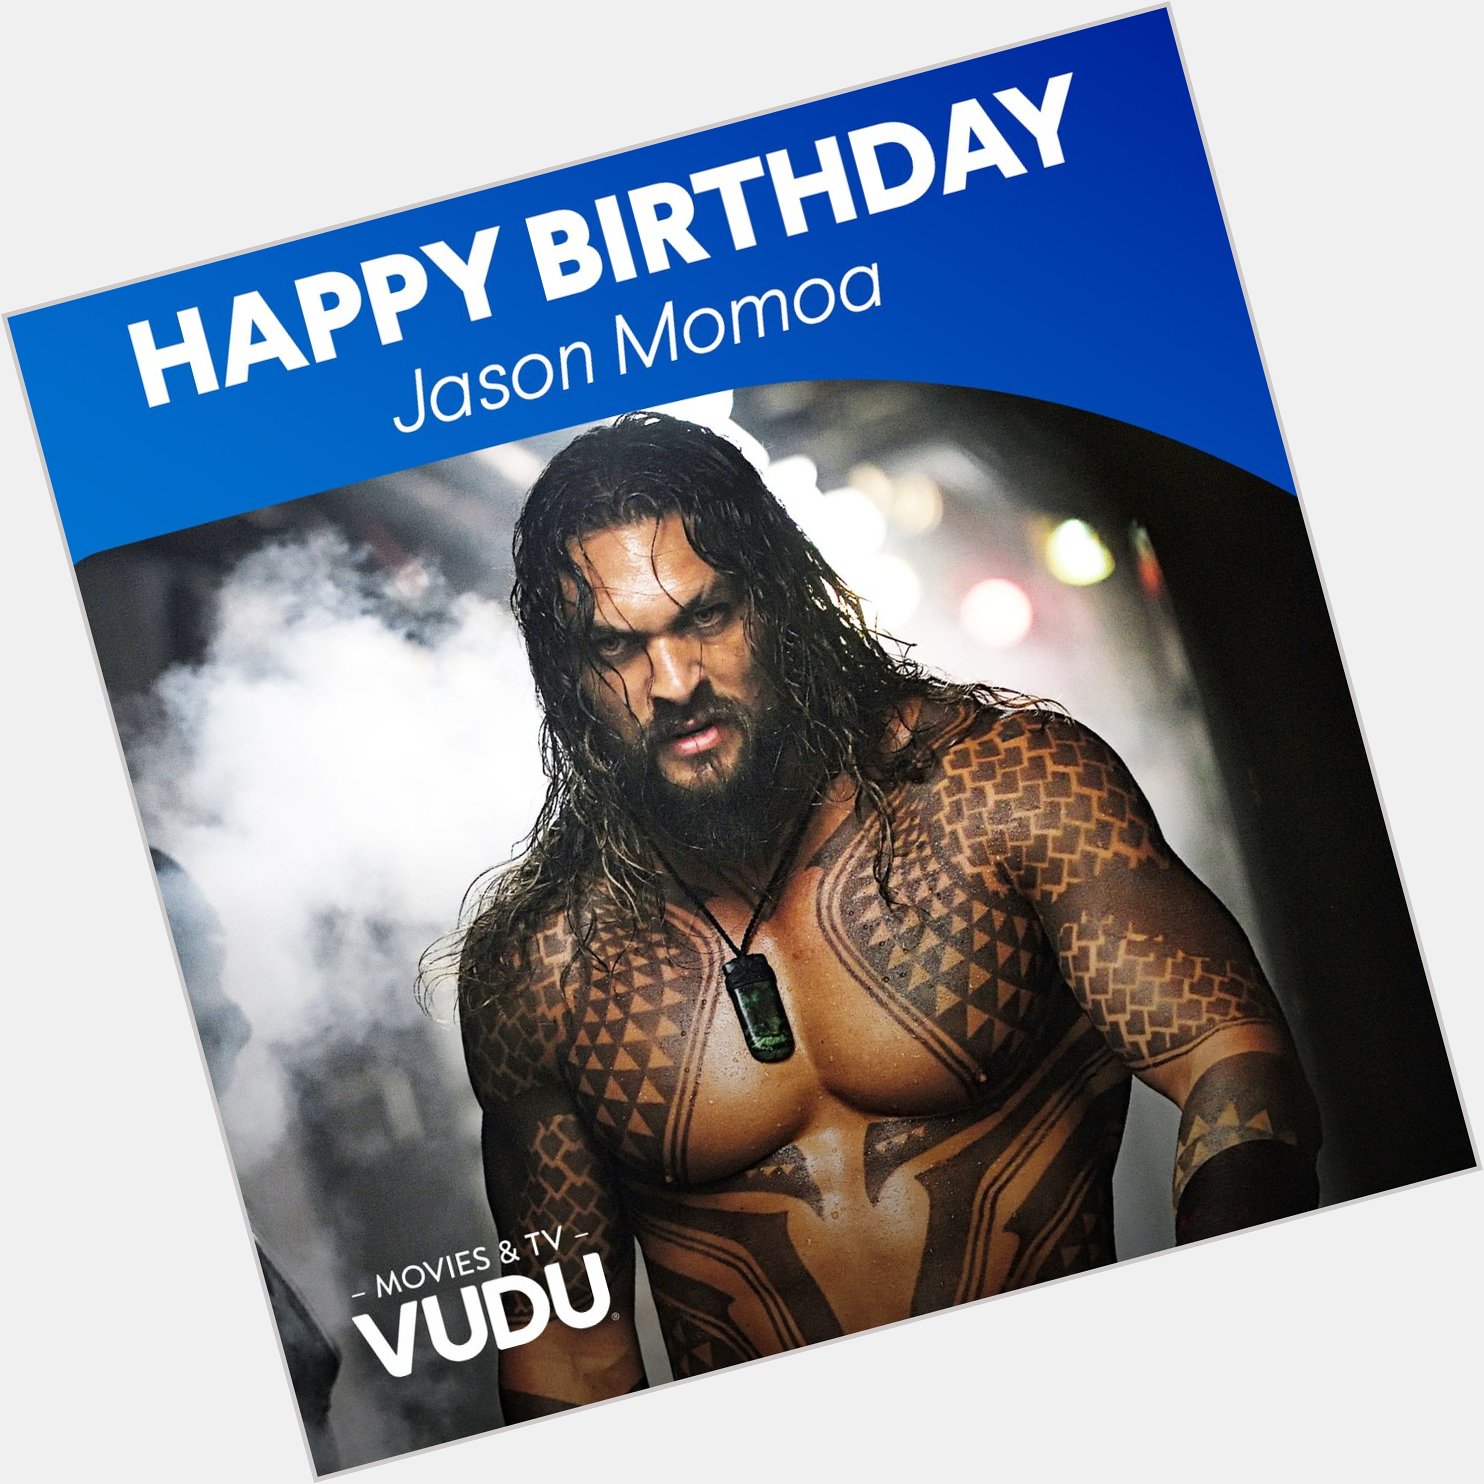 Happy Birthday Jason Momoa! What was your favorite scene from Aquaman?! 